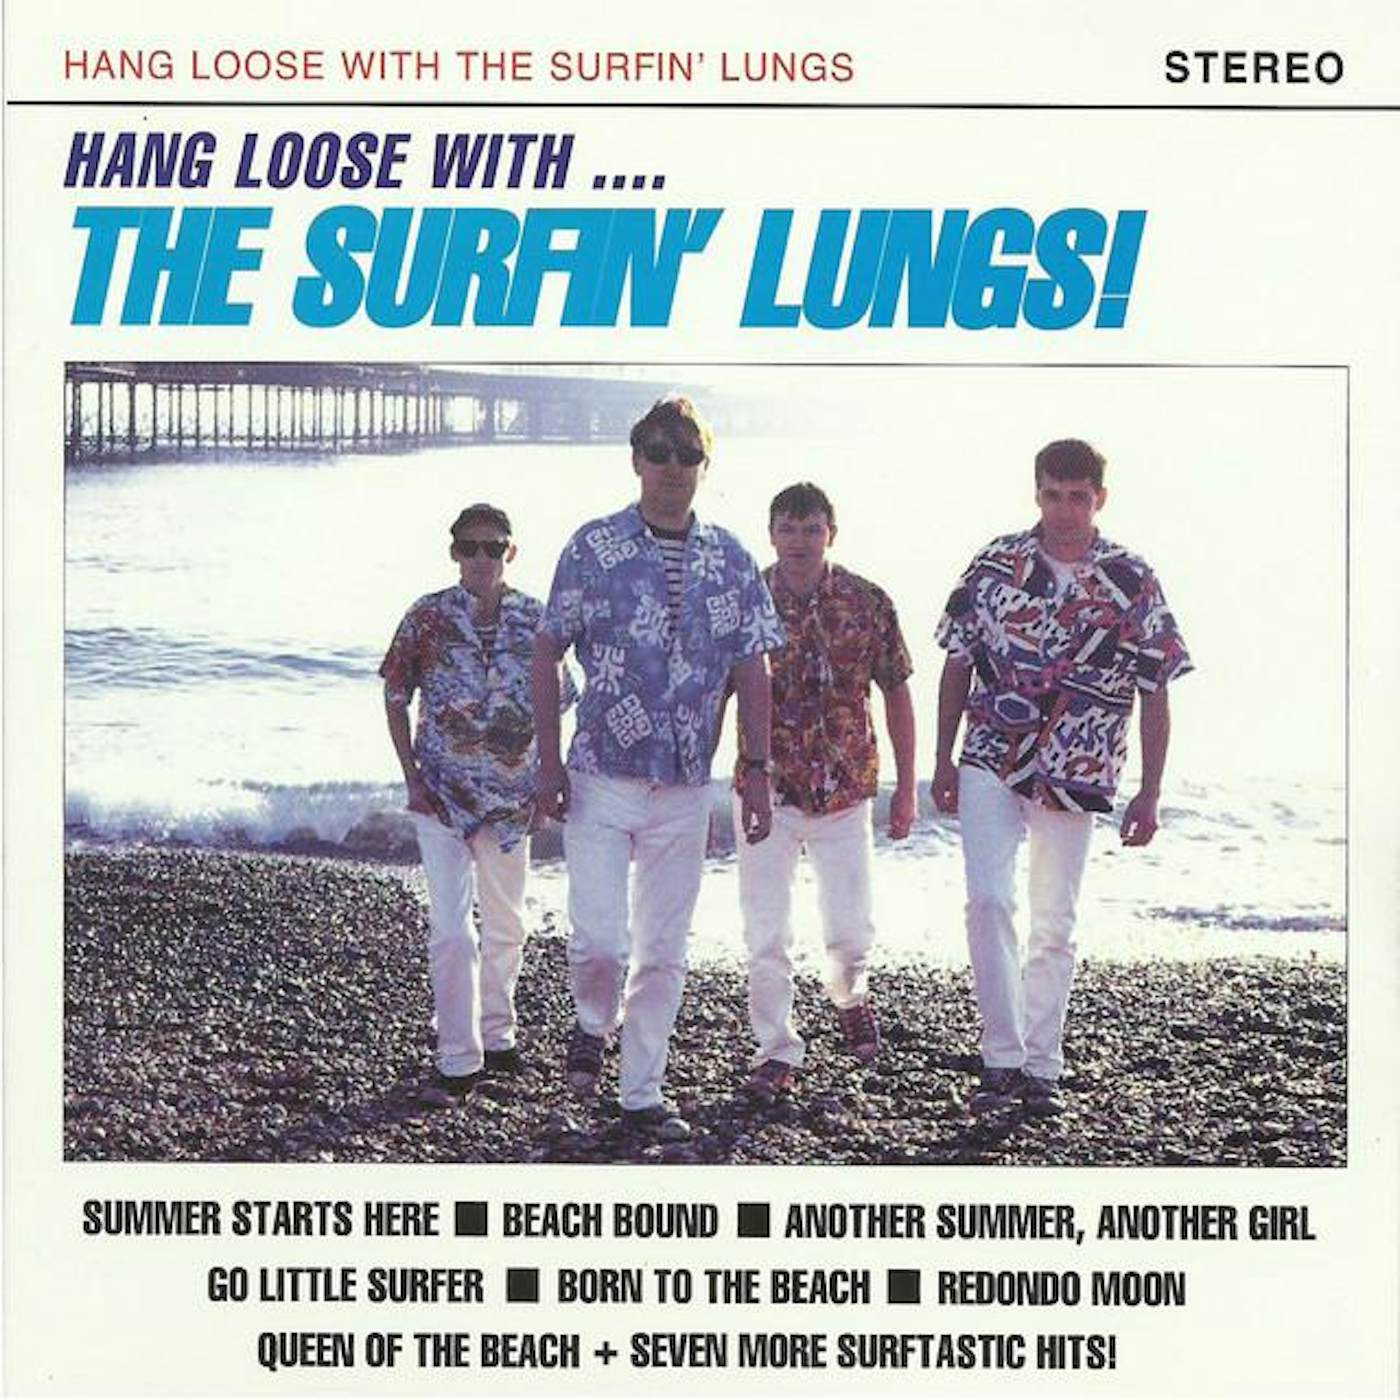 The Surfin' Lungs